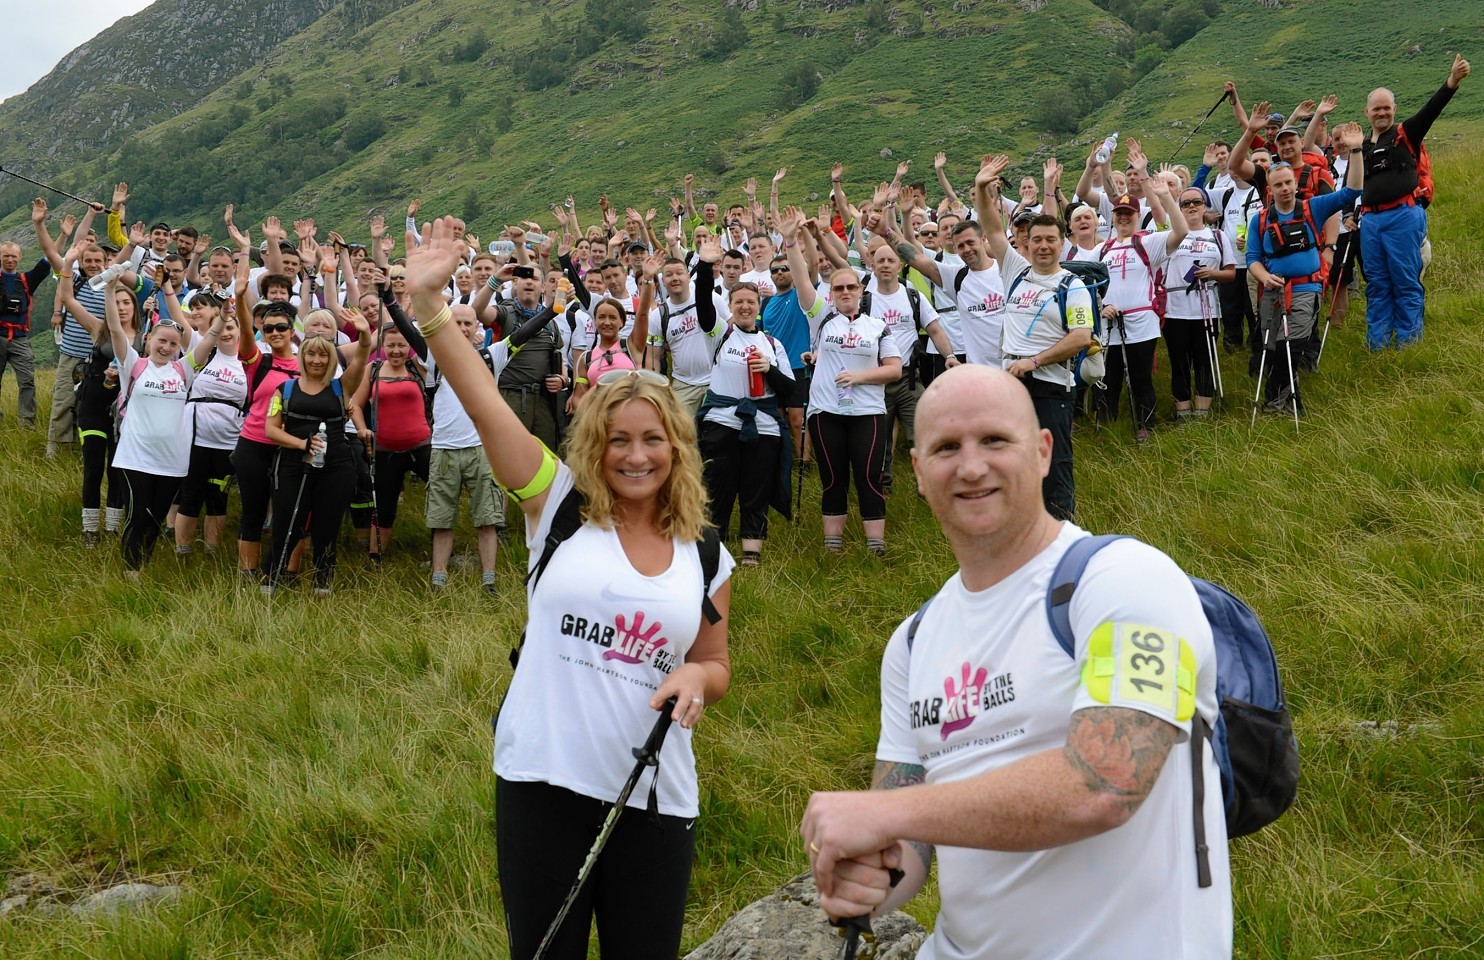 John Harston and his wife Sarah with 120 walkers after his previous Ben Nevis challenge